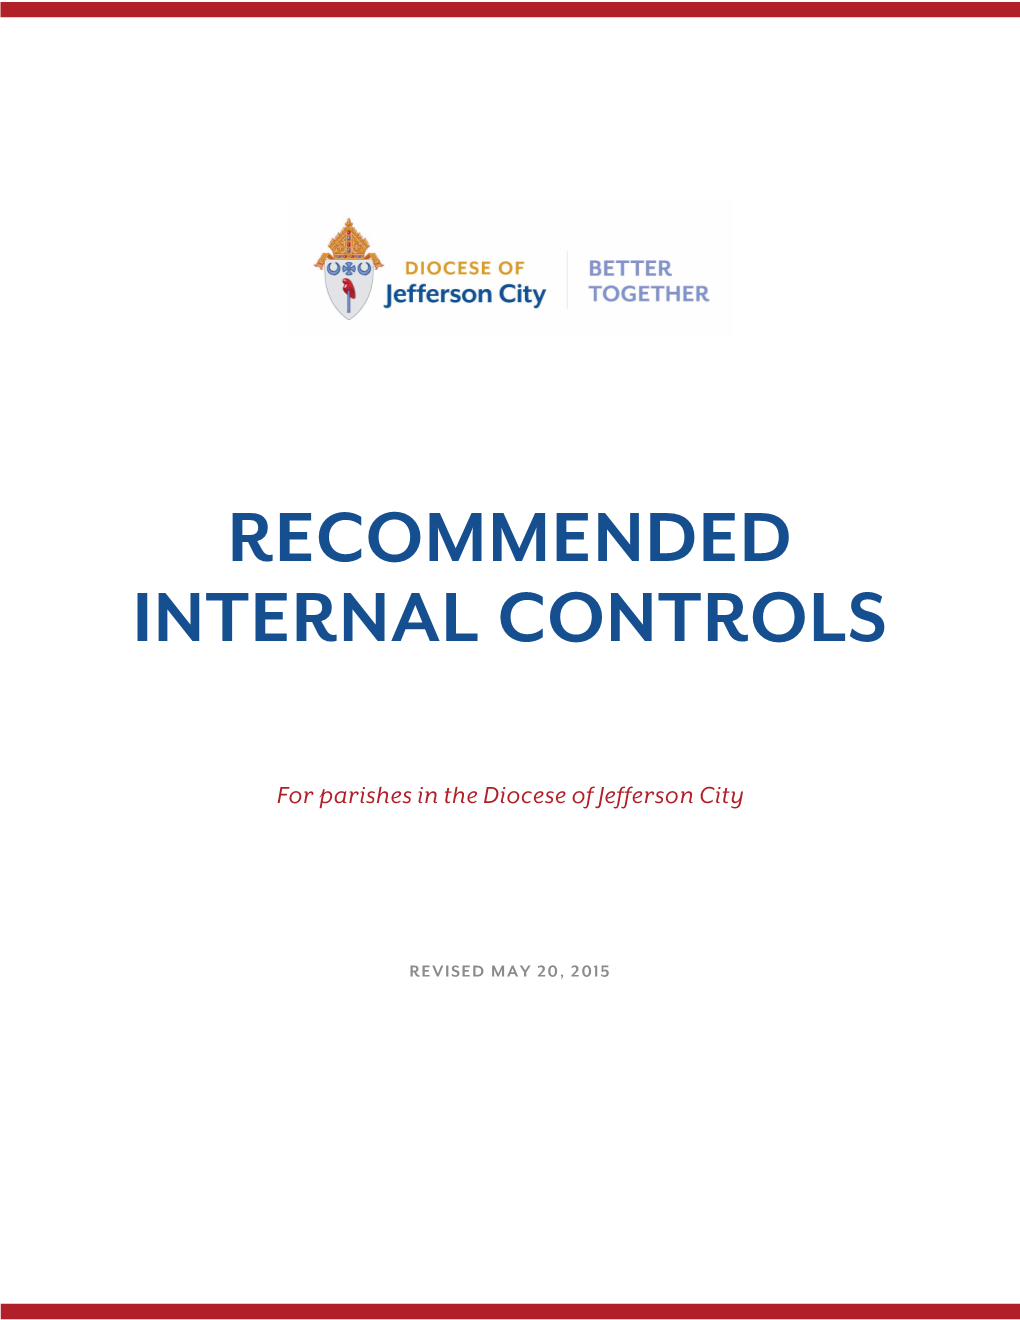 Recommended Internal Controls